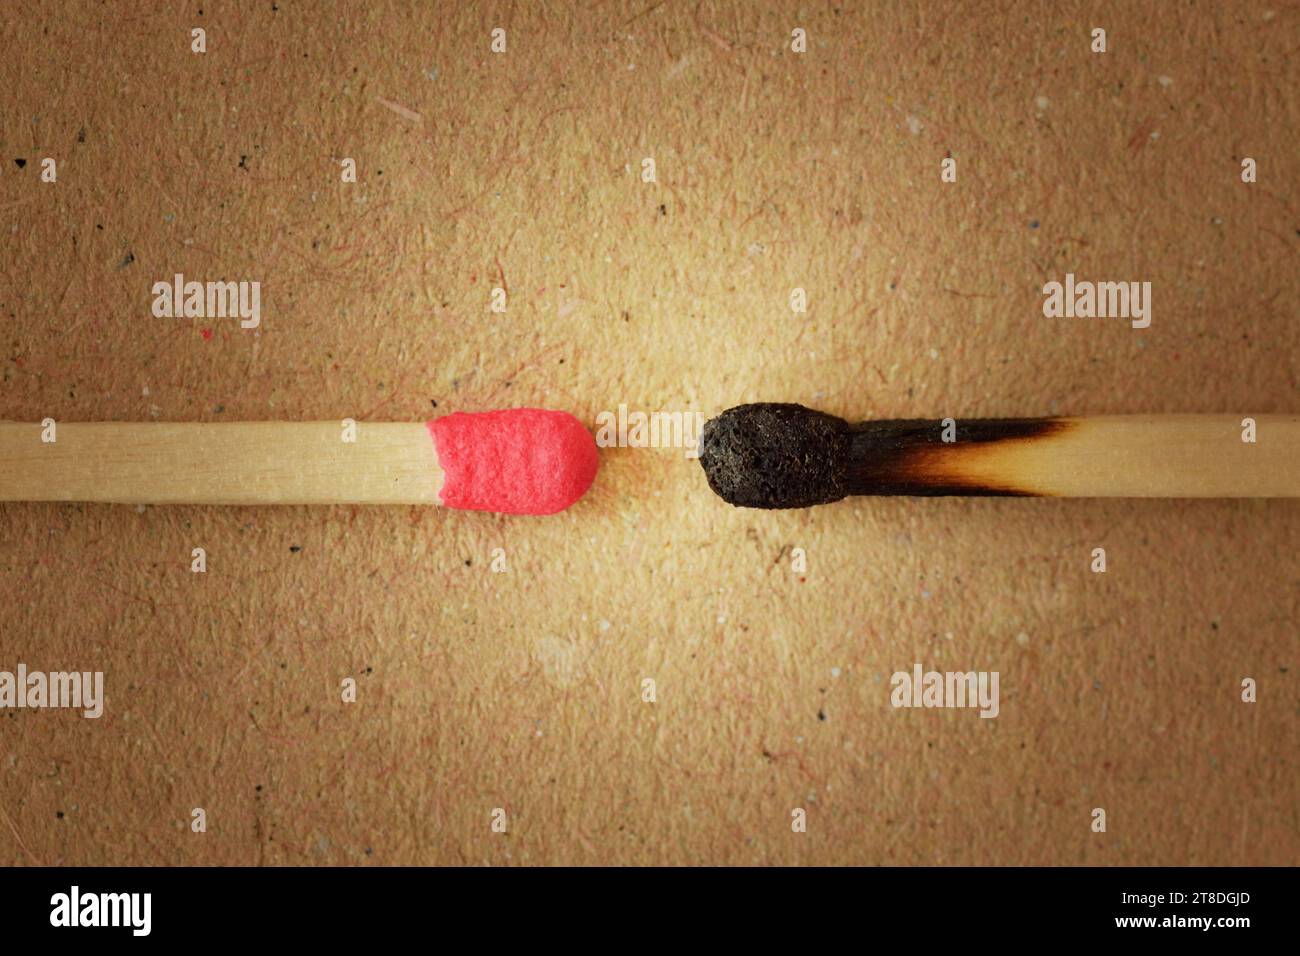 Close Up One New Wooden Match Stick Standing Among Burnt Matches Stick  Stock Photo - Download Image Now - iStock